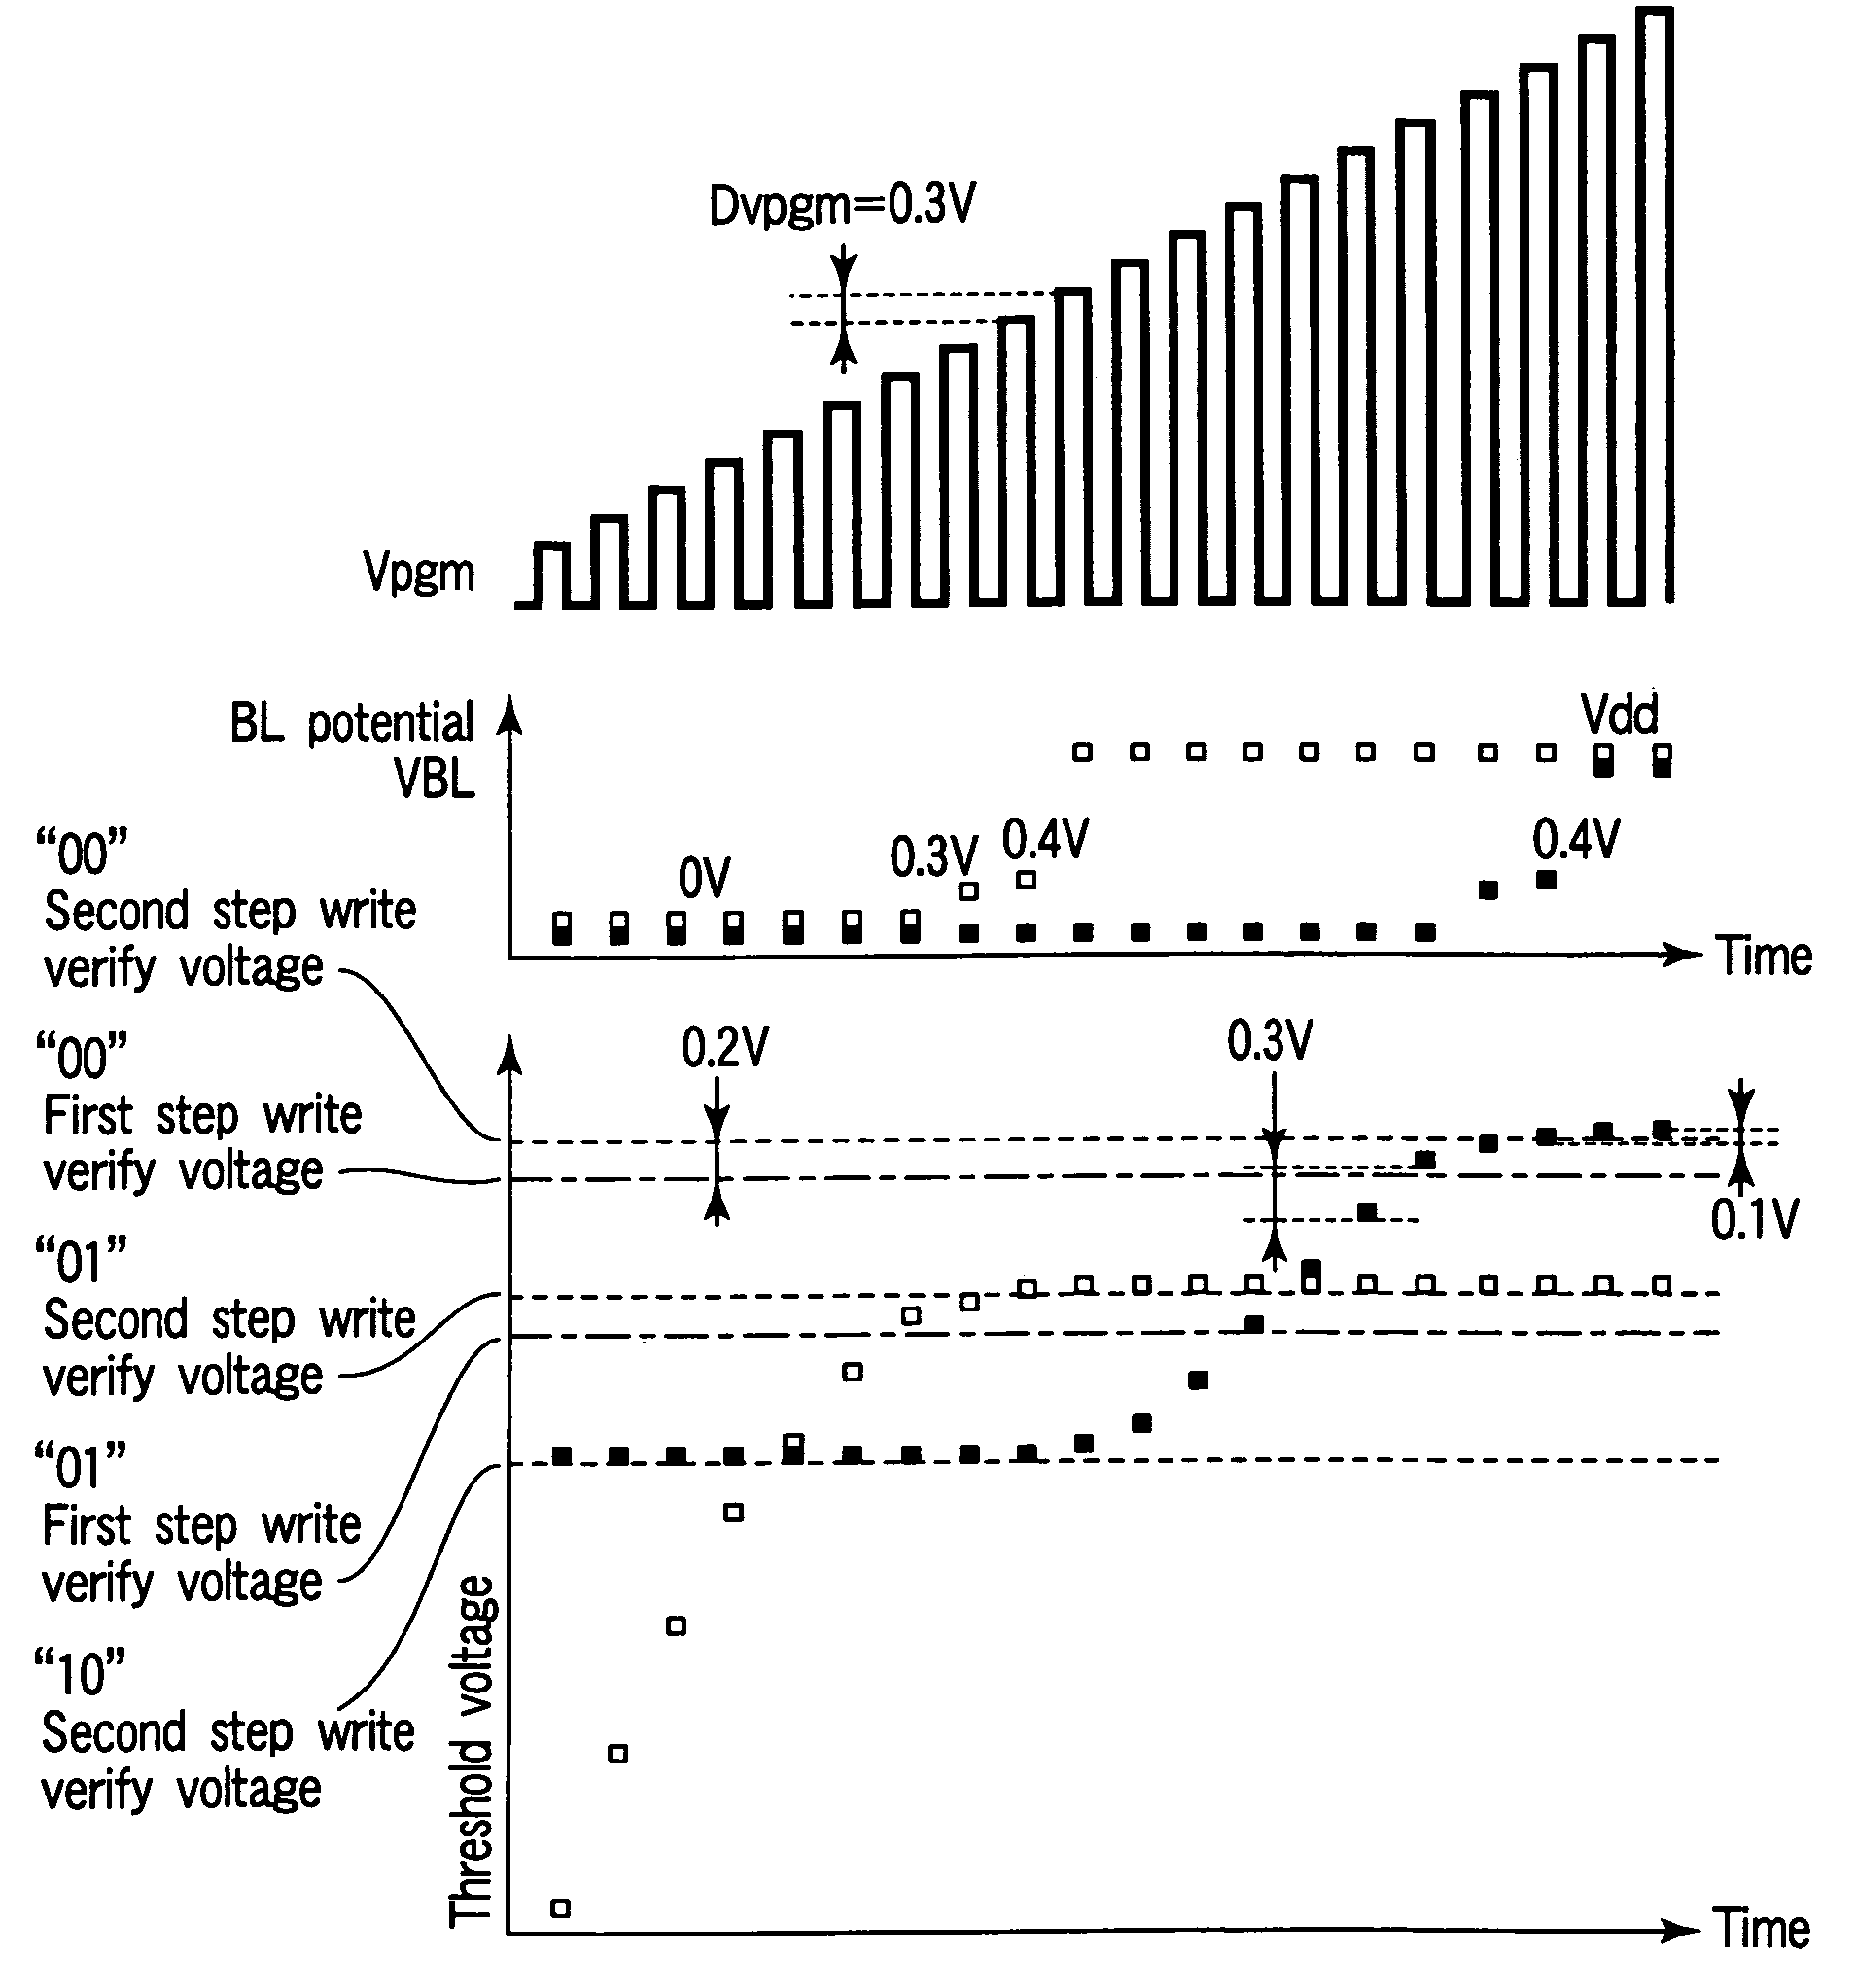 Non-volatile semiconductor memory device adapted to store a multi-valued in a single memory cell